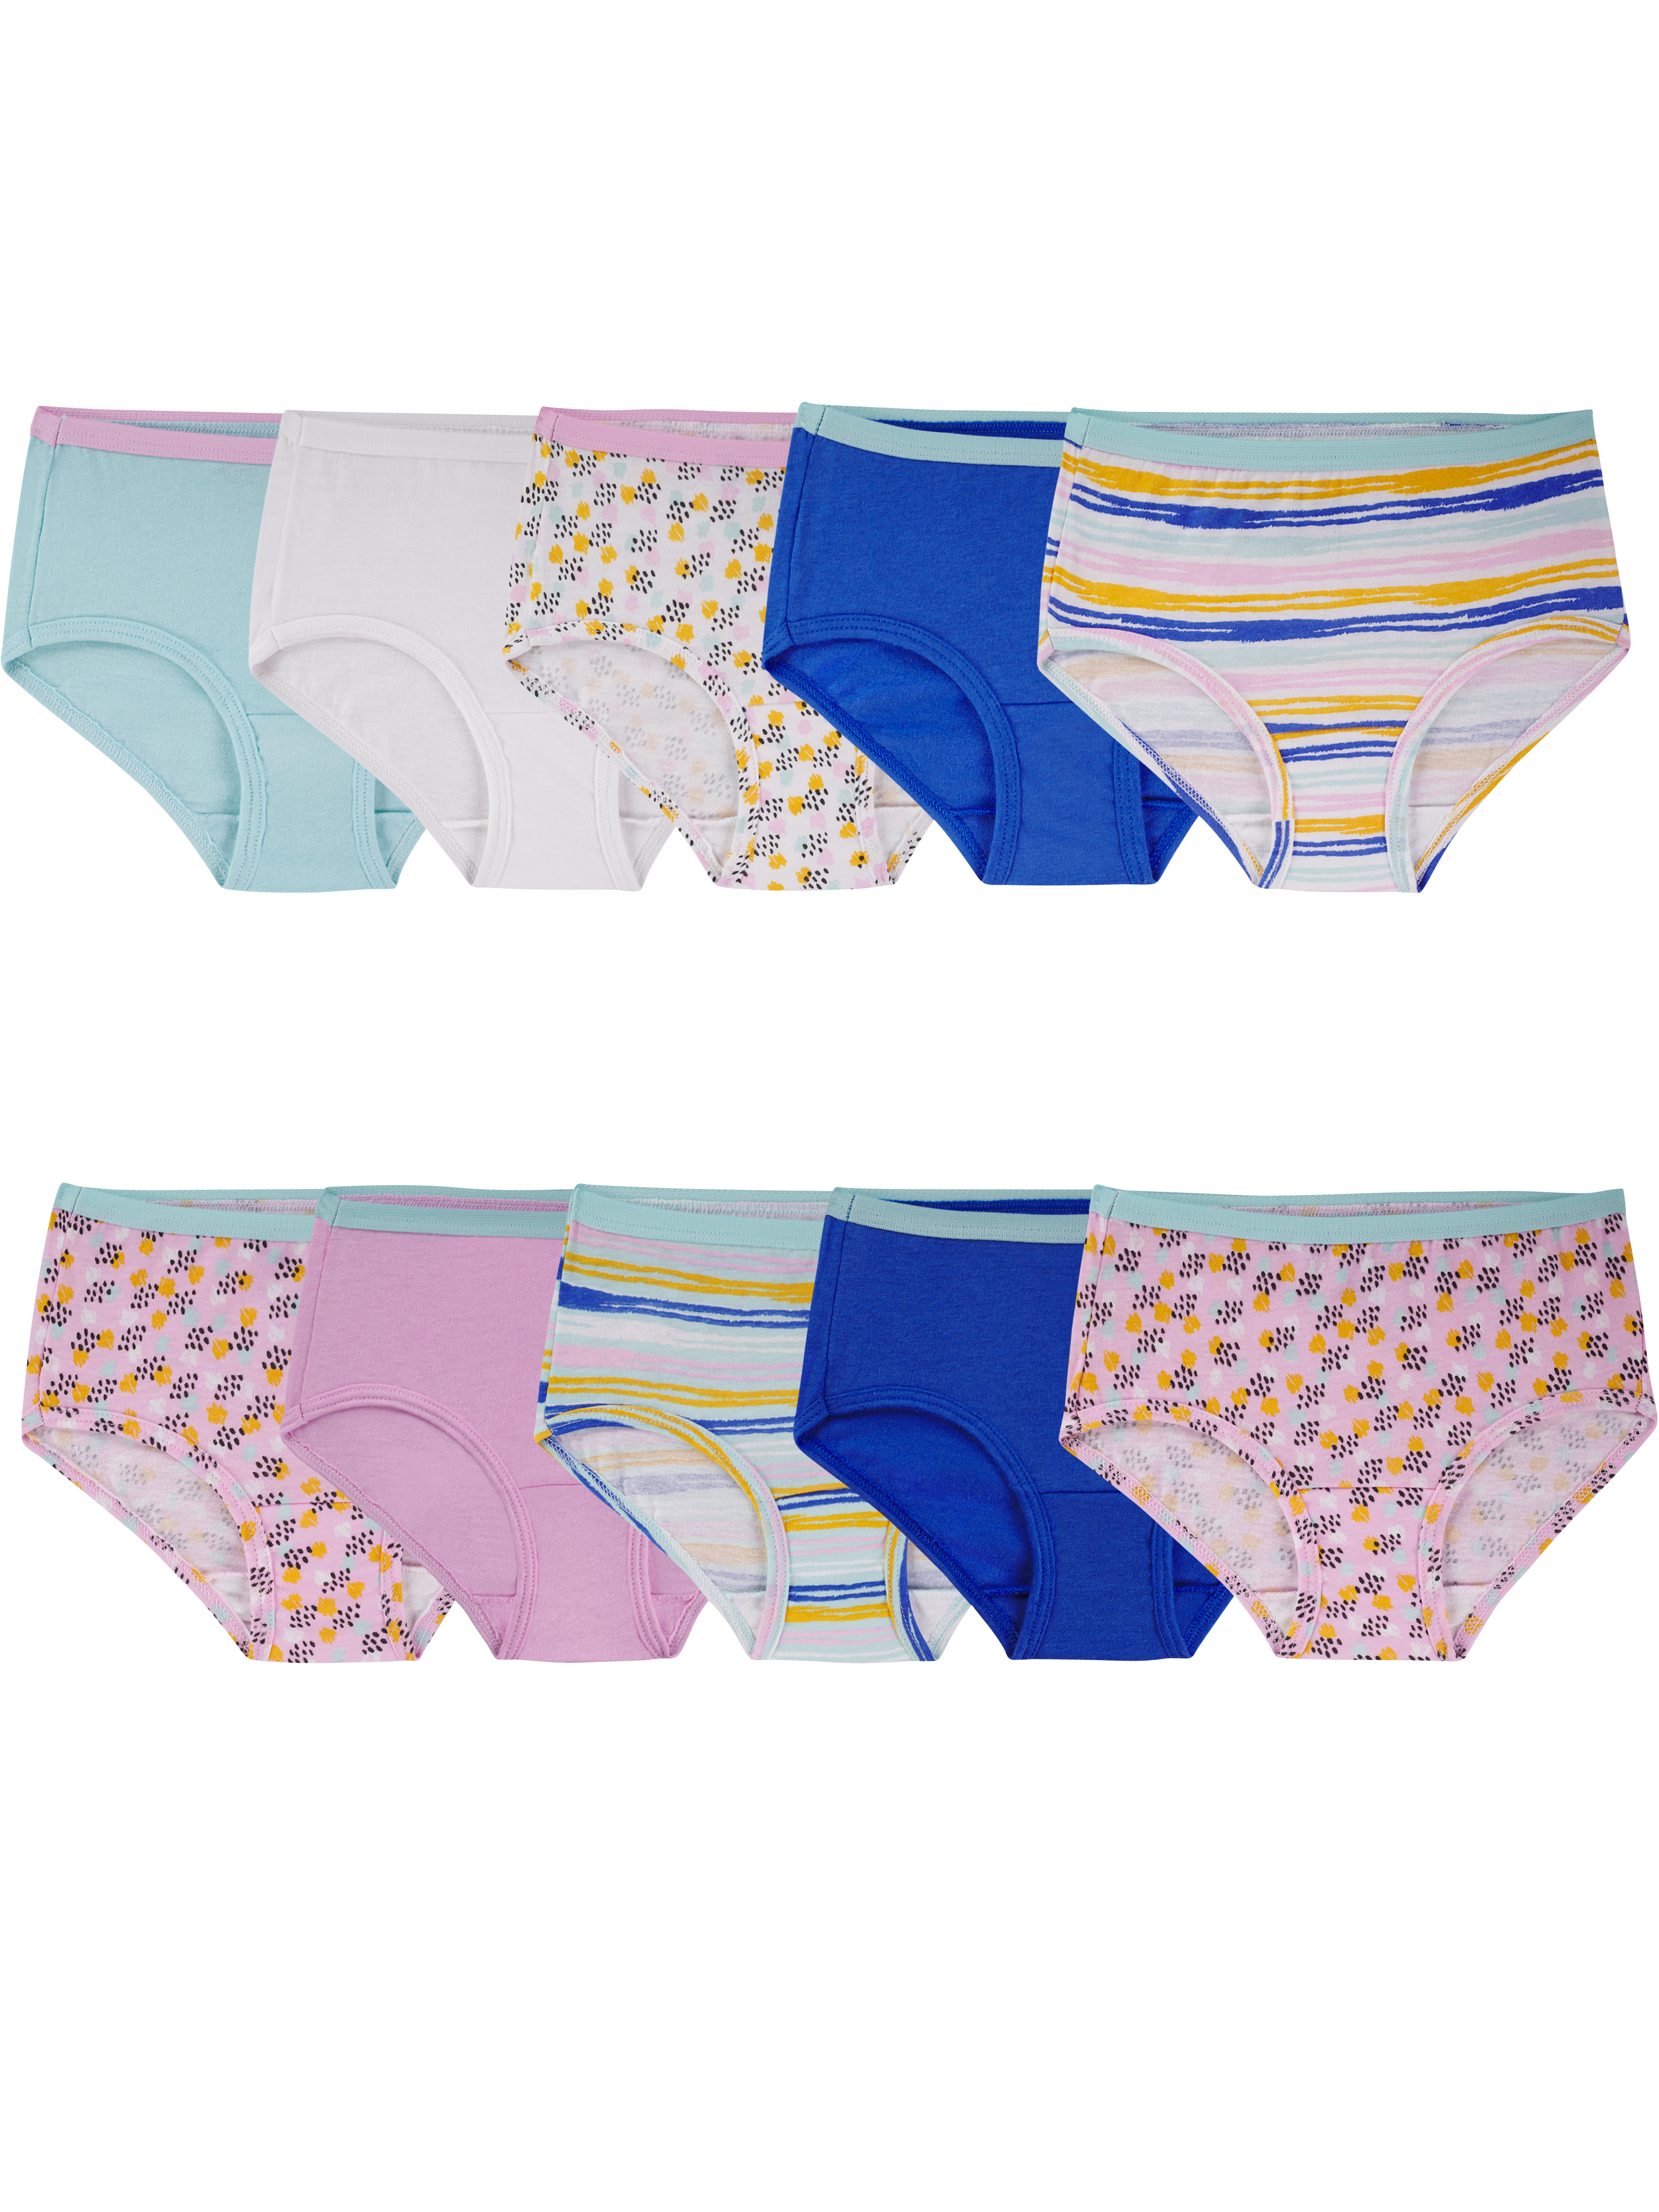 FRUIT OF THE LOOM GIRLS' ASSORTED COTTON BRIEF, 10 PACK